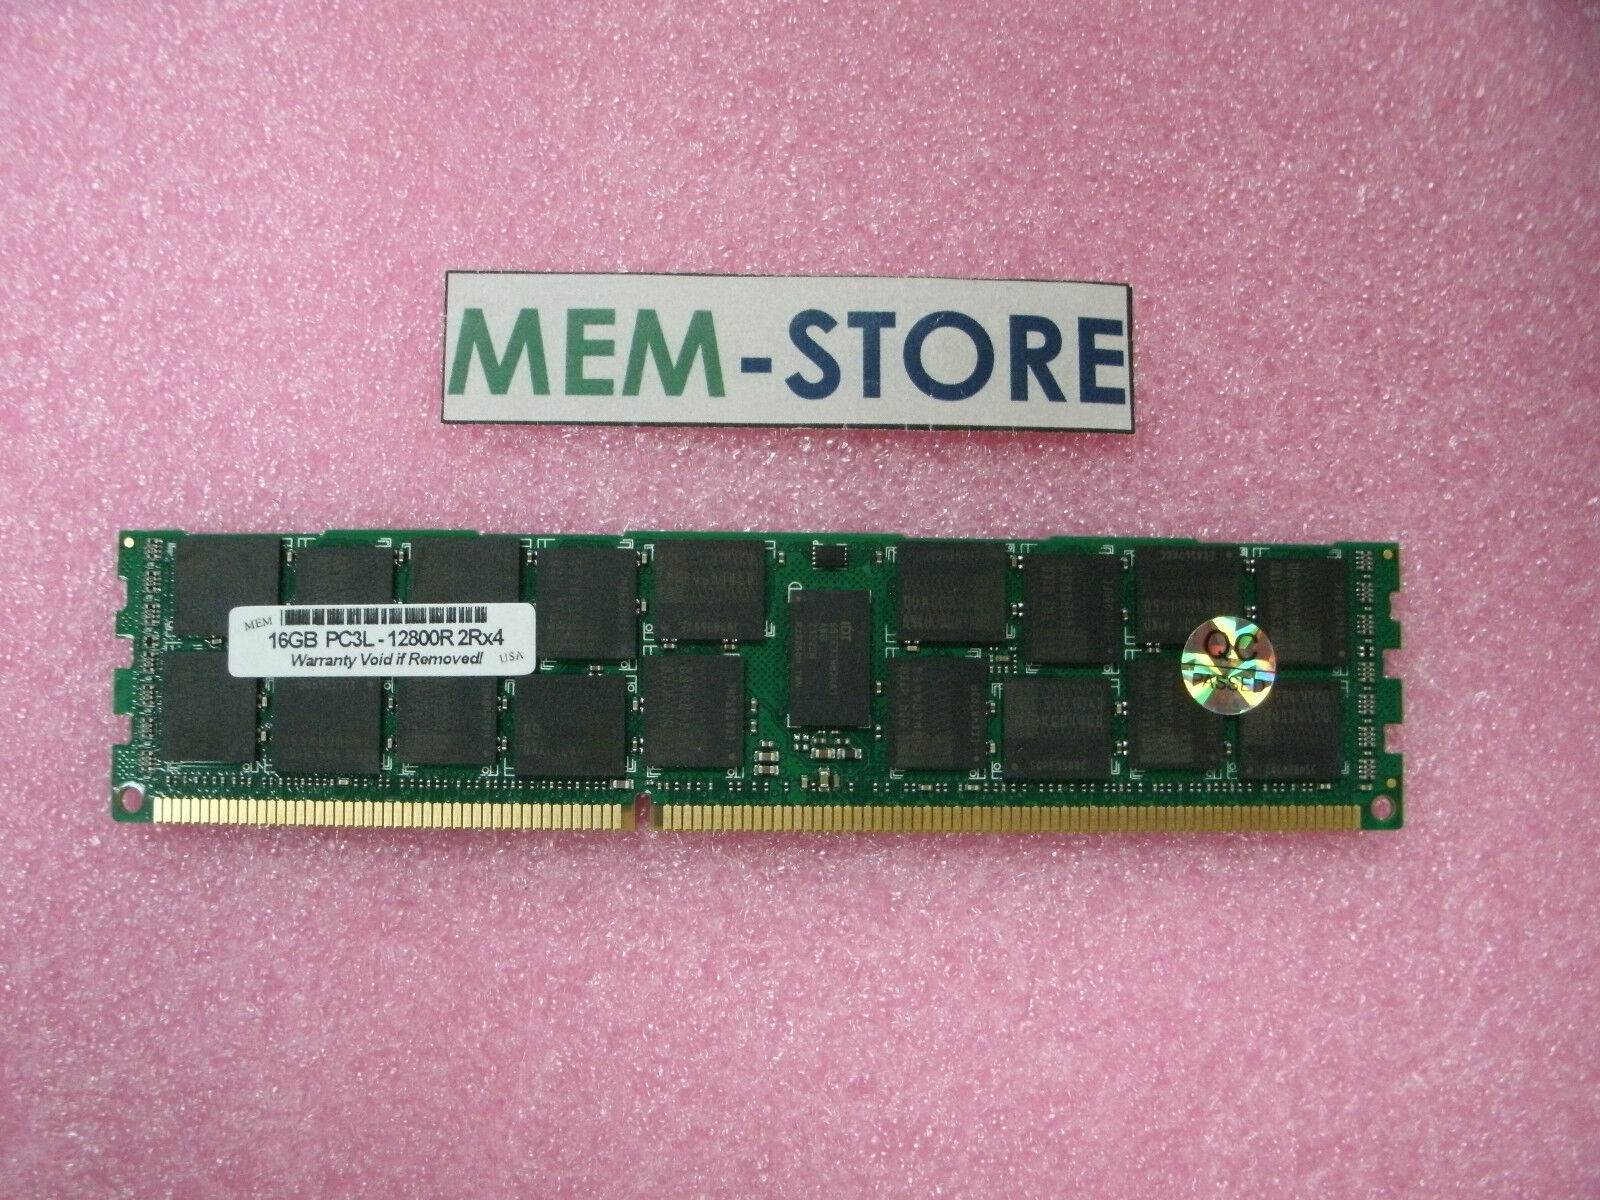 0C19535 16GB PC3L-12800R DDR3-1600 Memory ThinkServer TD340 TD350 (3rd Party) - image 1 of 2